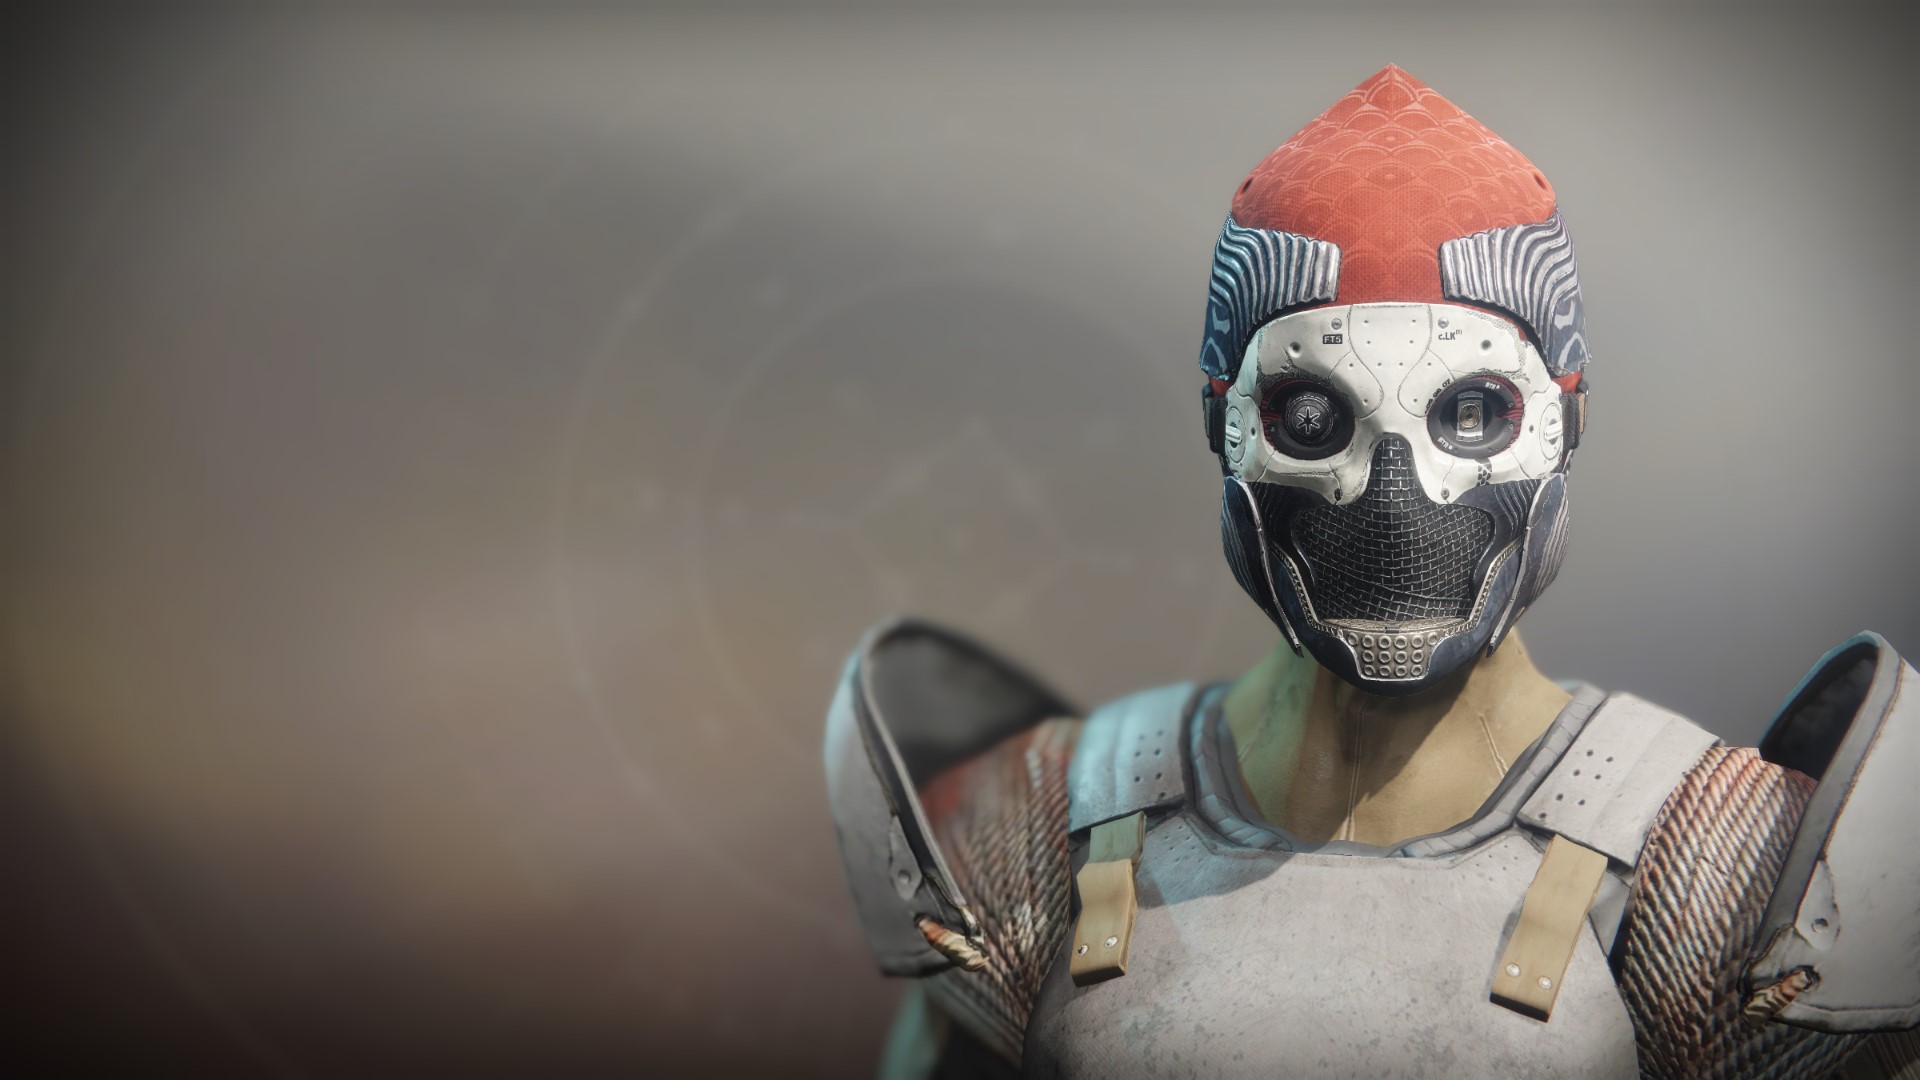 Full stats and details for Одноглазая маска, a Helmet in Destiny 2. 